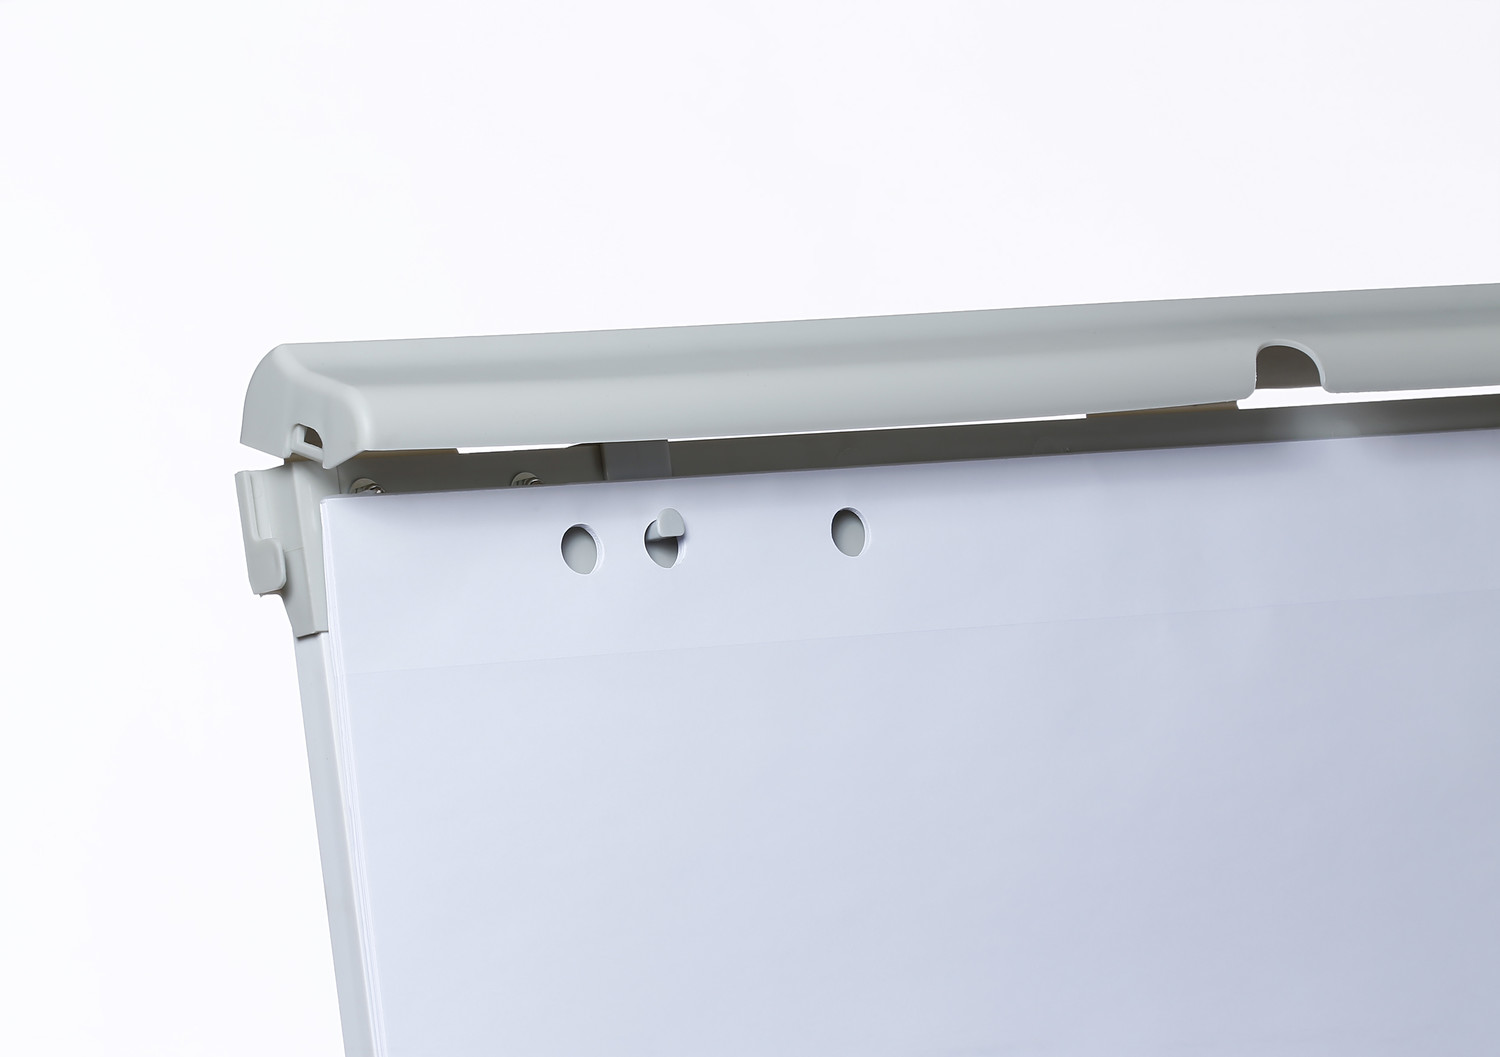 Commonly used flip chart pads can be securely attached to the hidden pad holder with adjustable pins